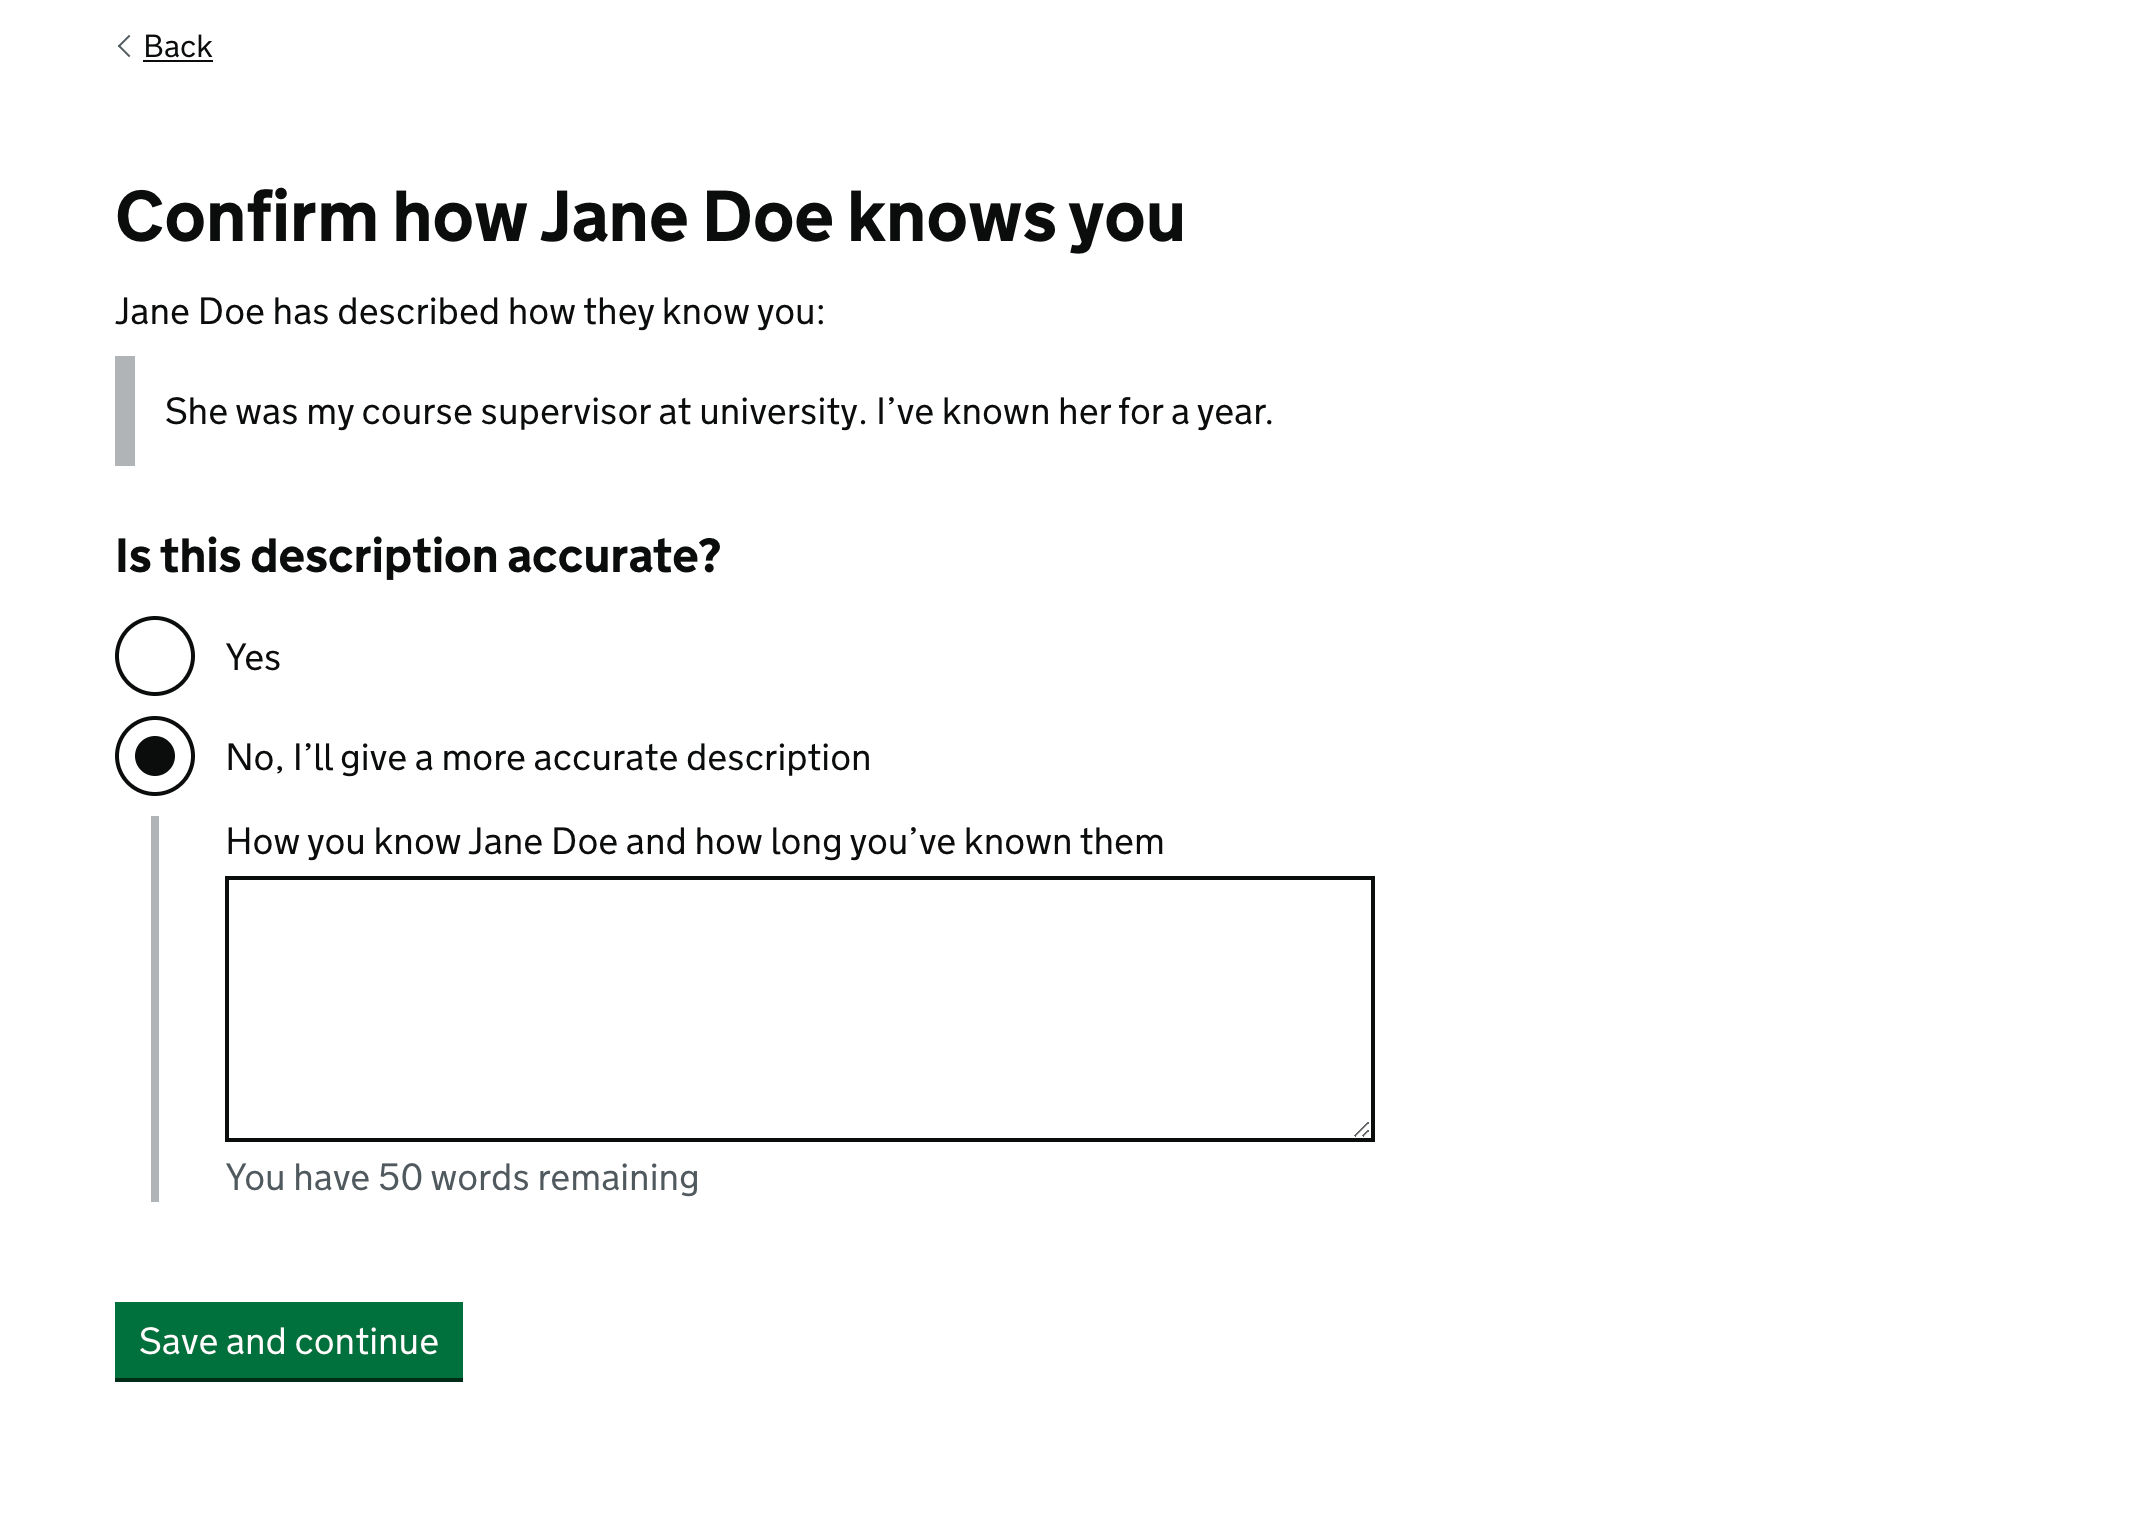 Screenshot showing the heading 'Confirm how Jane Doe knows you' followed by a quoted description and the question 'Is this description accurate?'